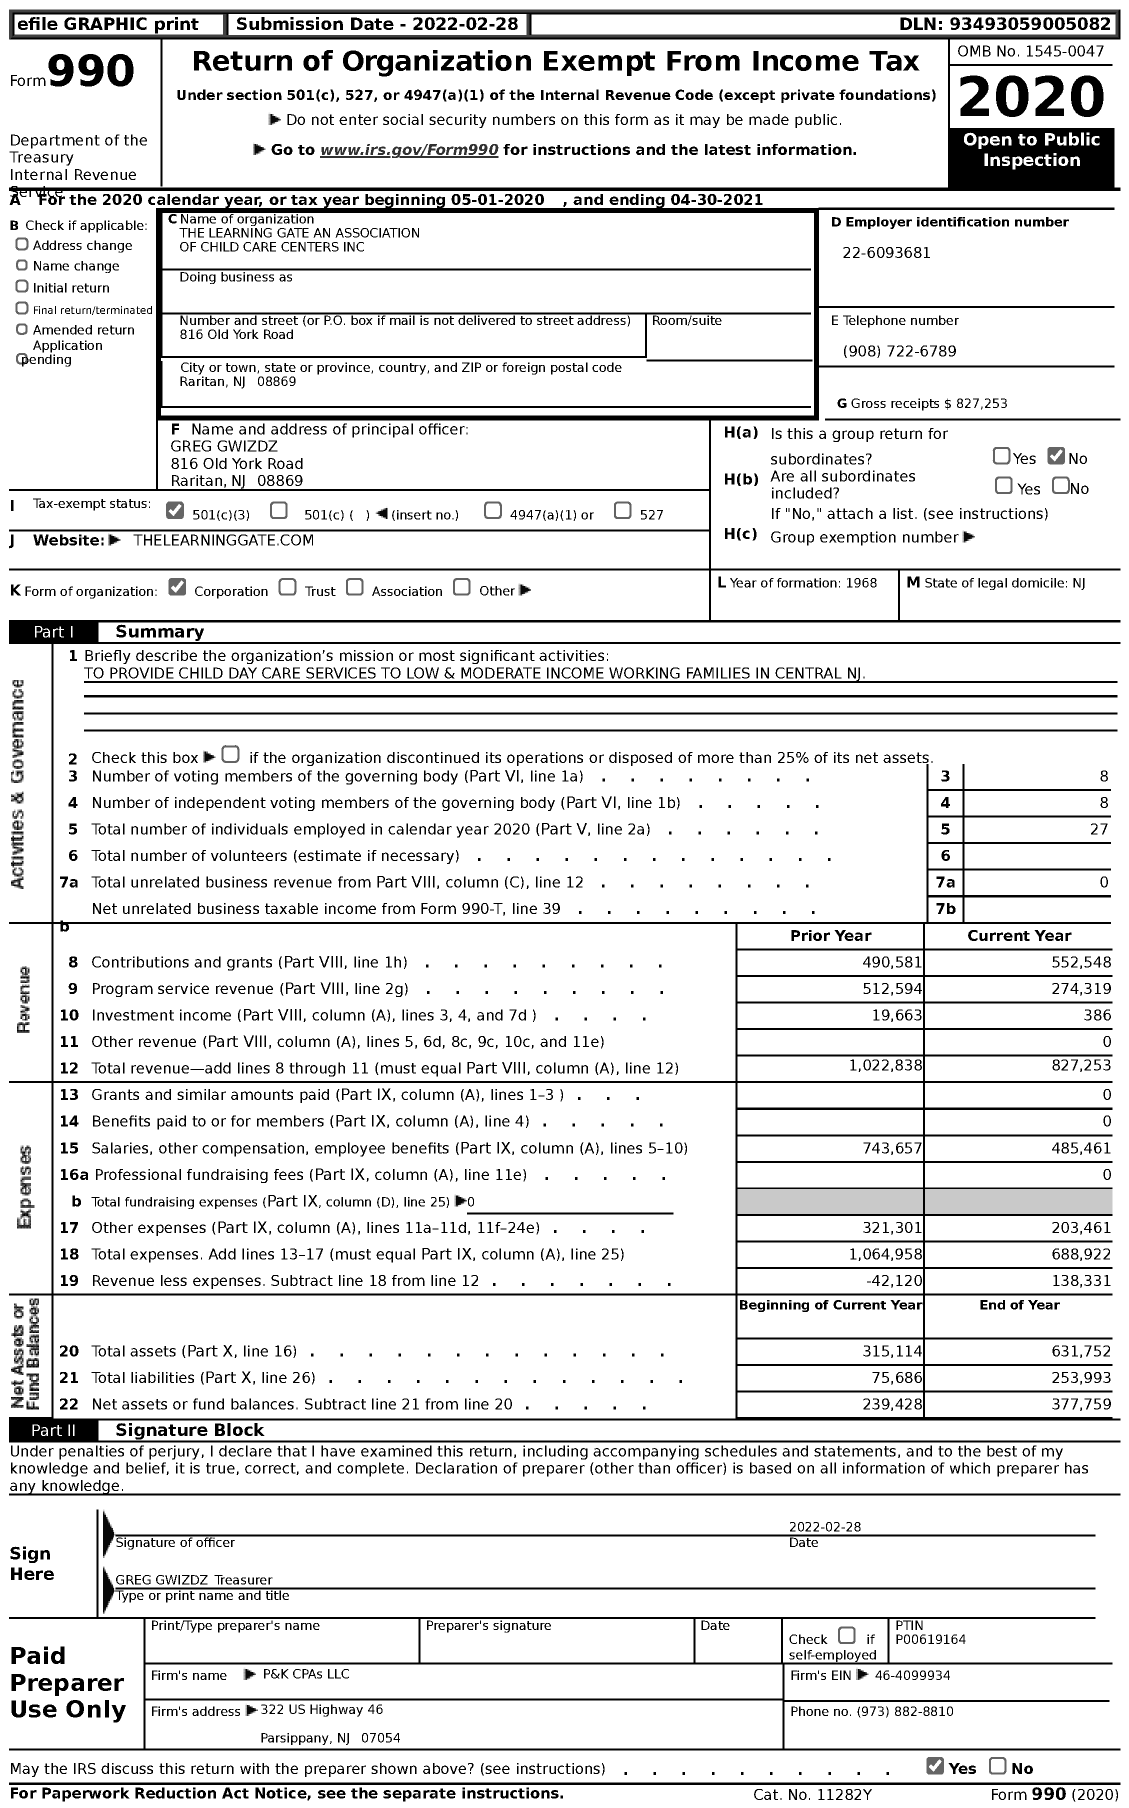 Image of first page of 2020 Form 990 for The Learning Gate An Association of Child Care Centers